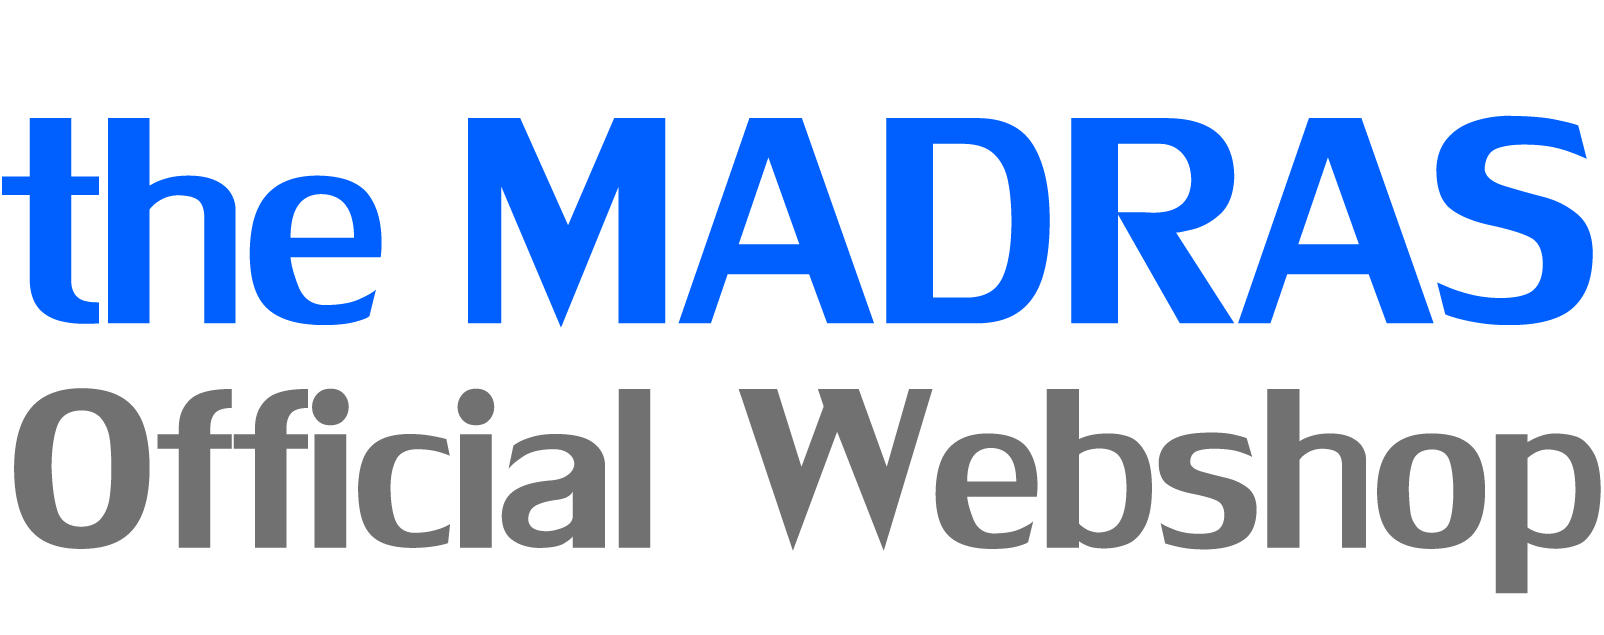 the MADRAS Official Webshop